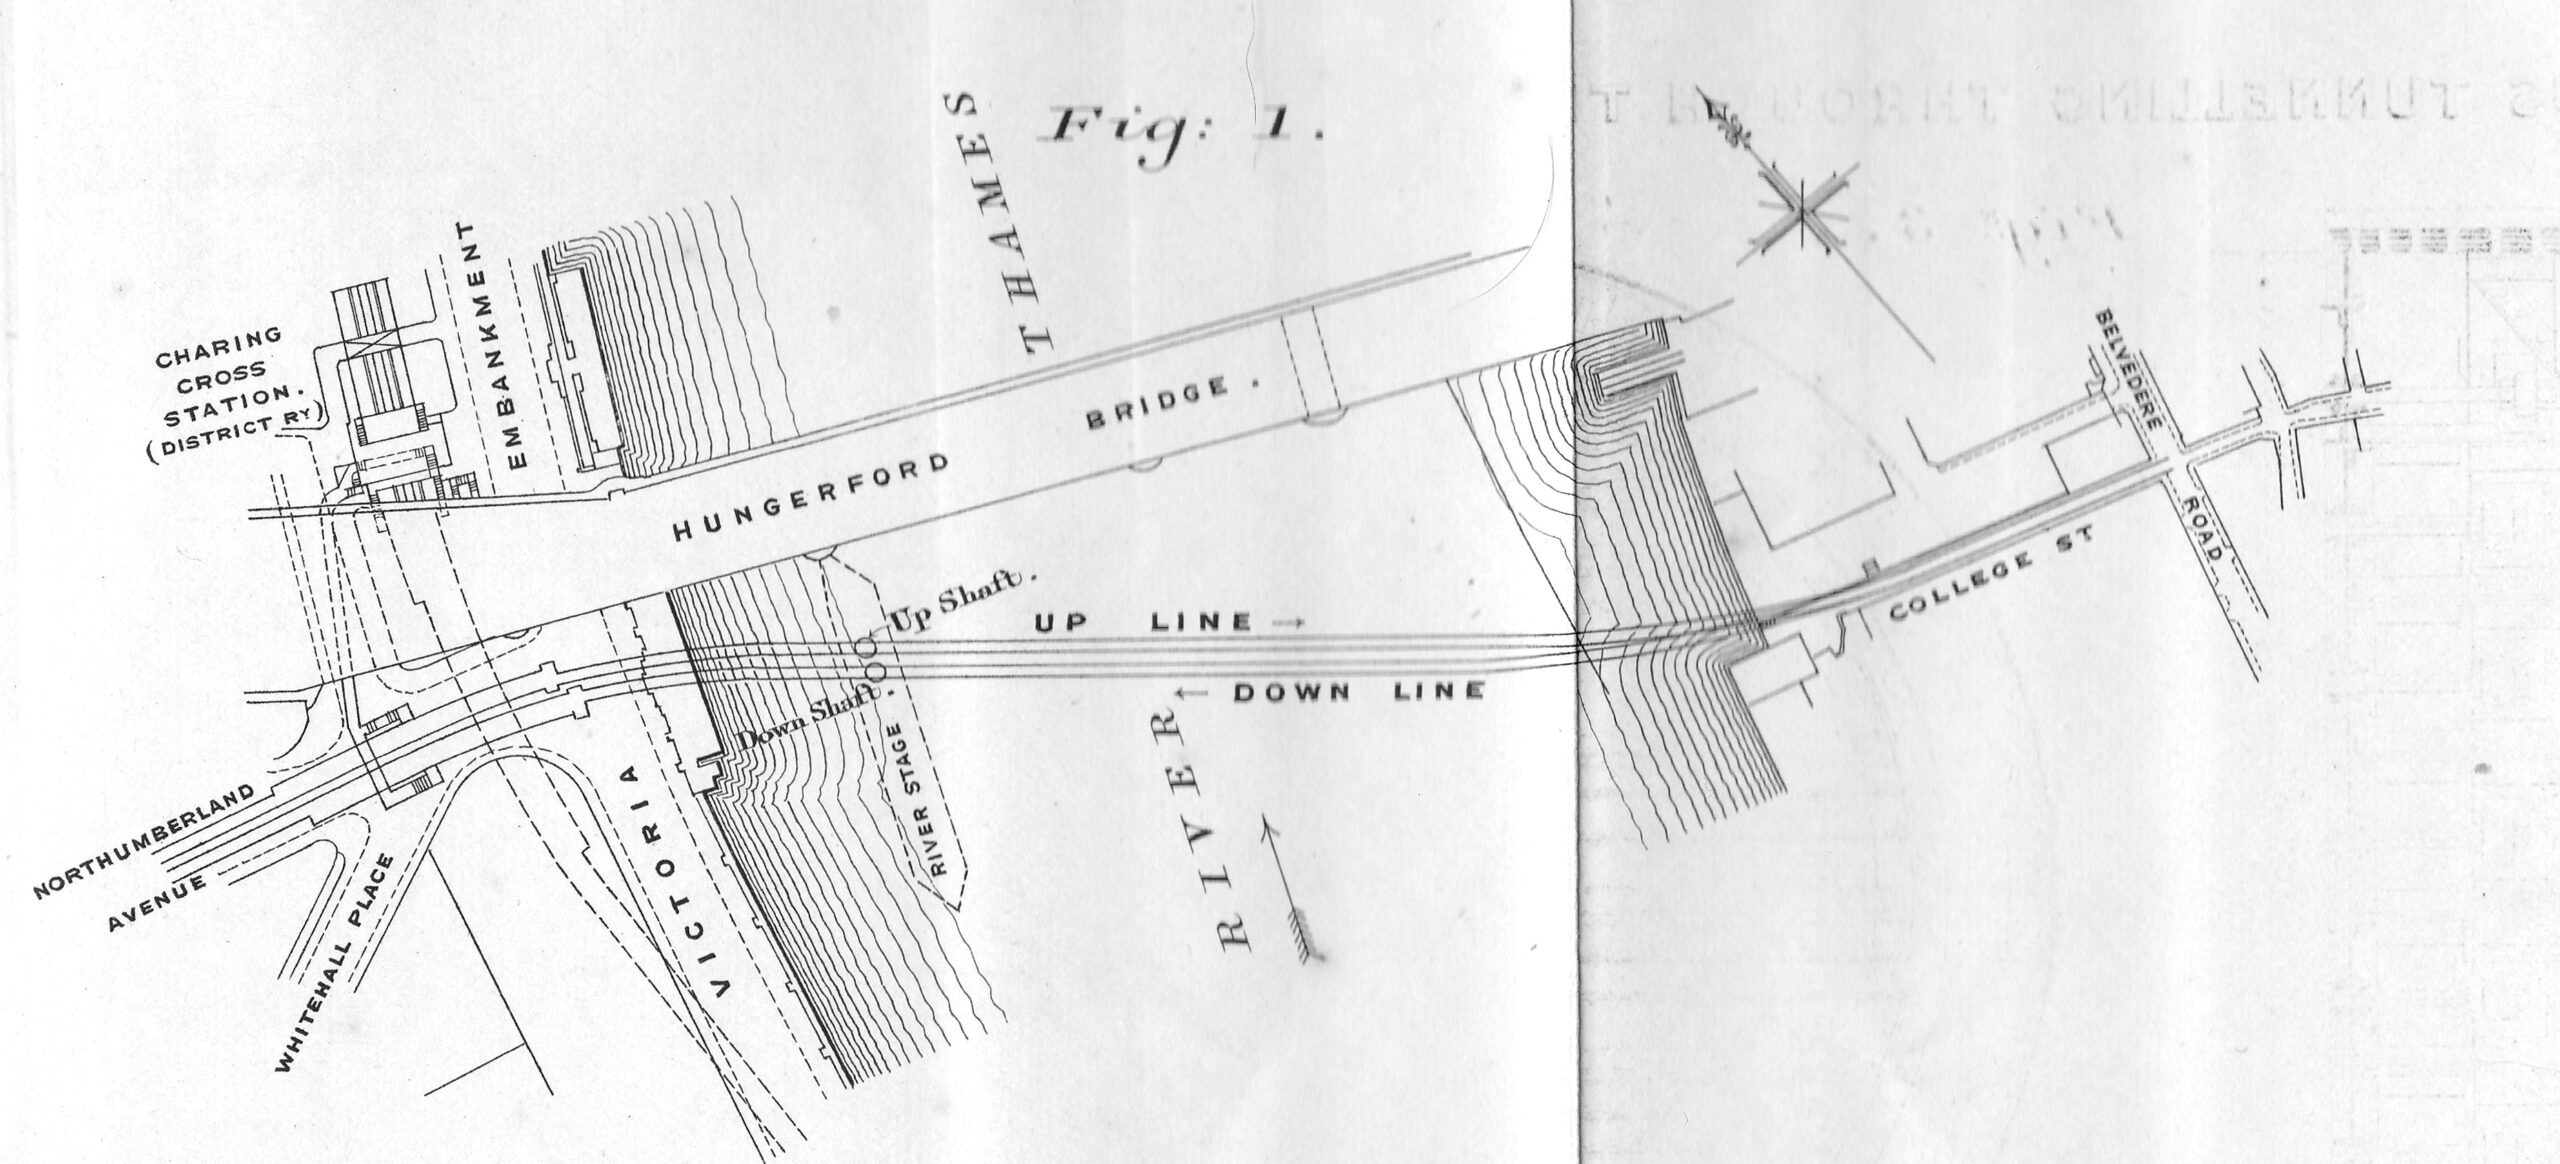 The SECOND Oldest Tube: London's Lost Pneumatic Railway